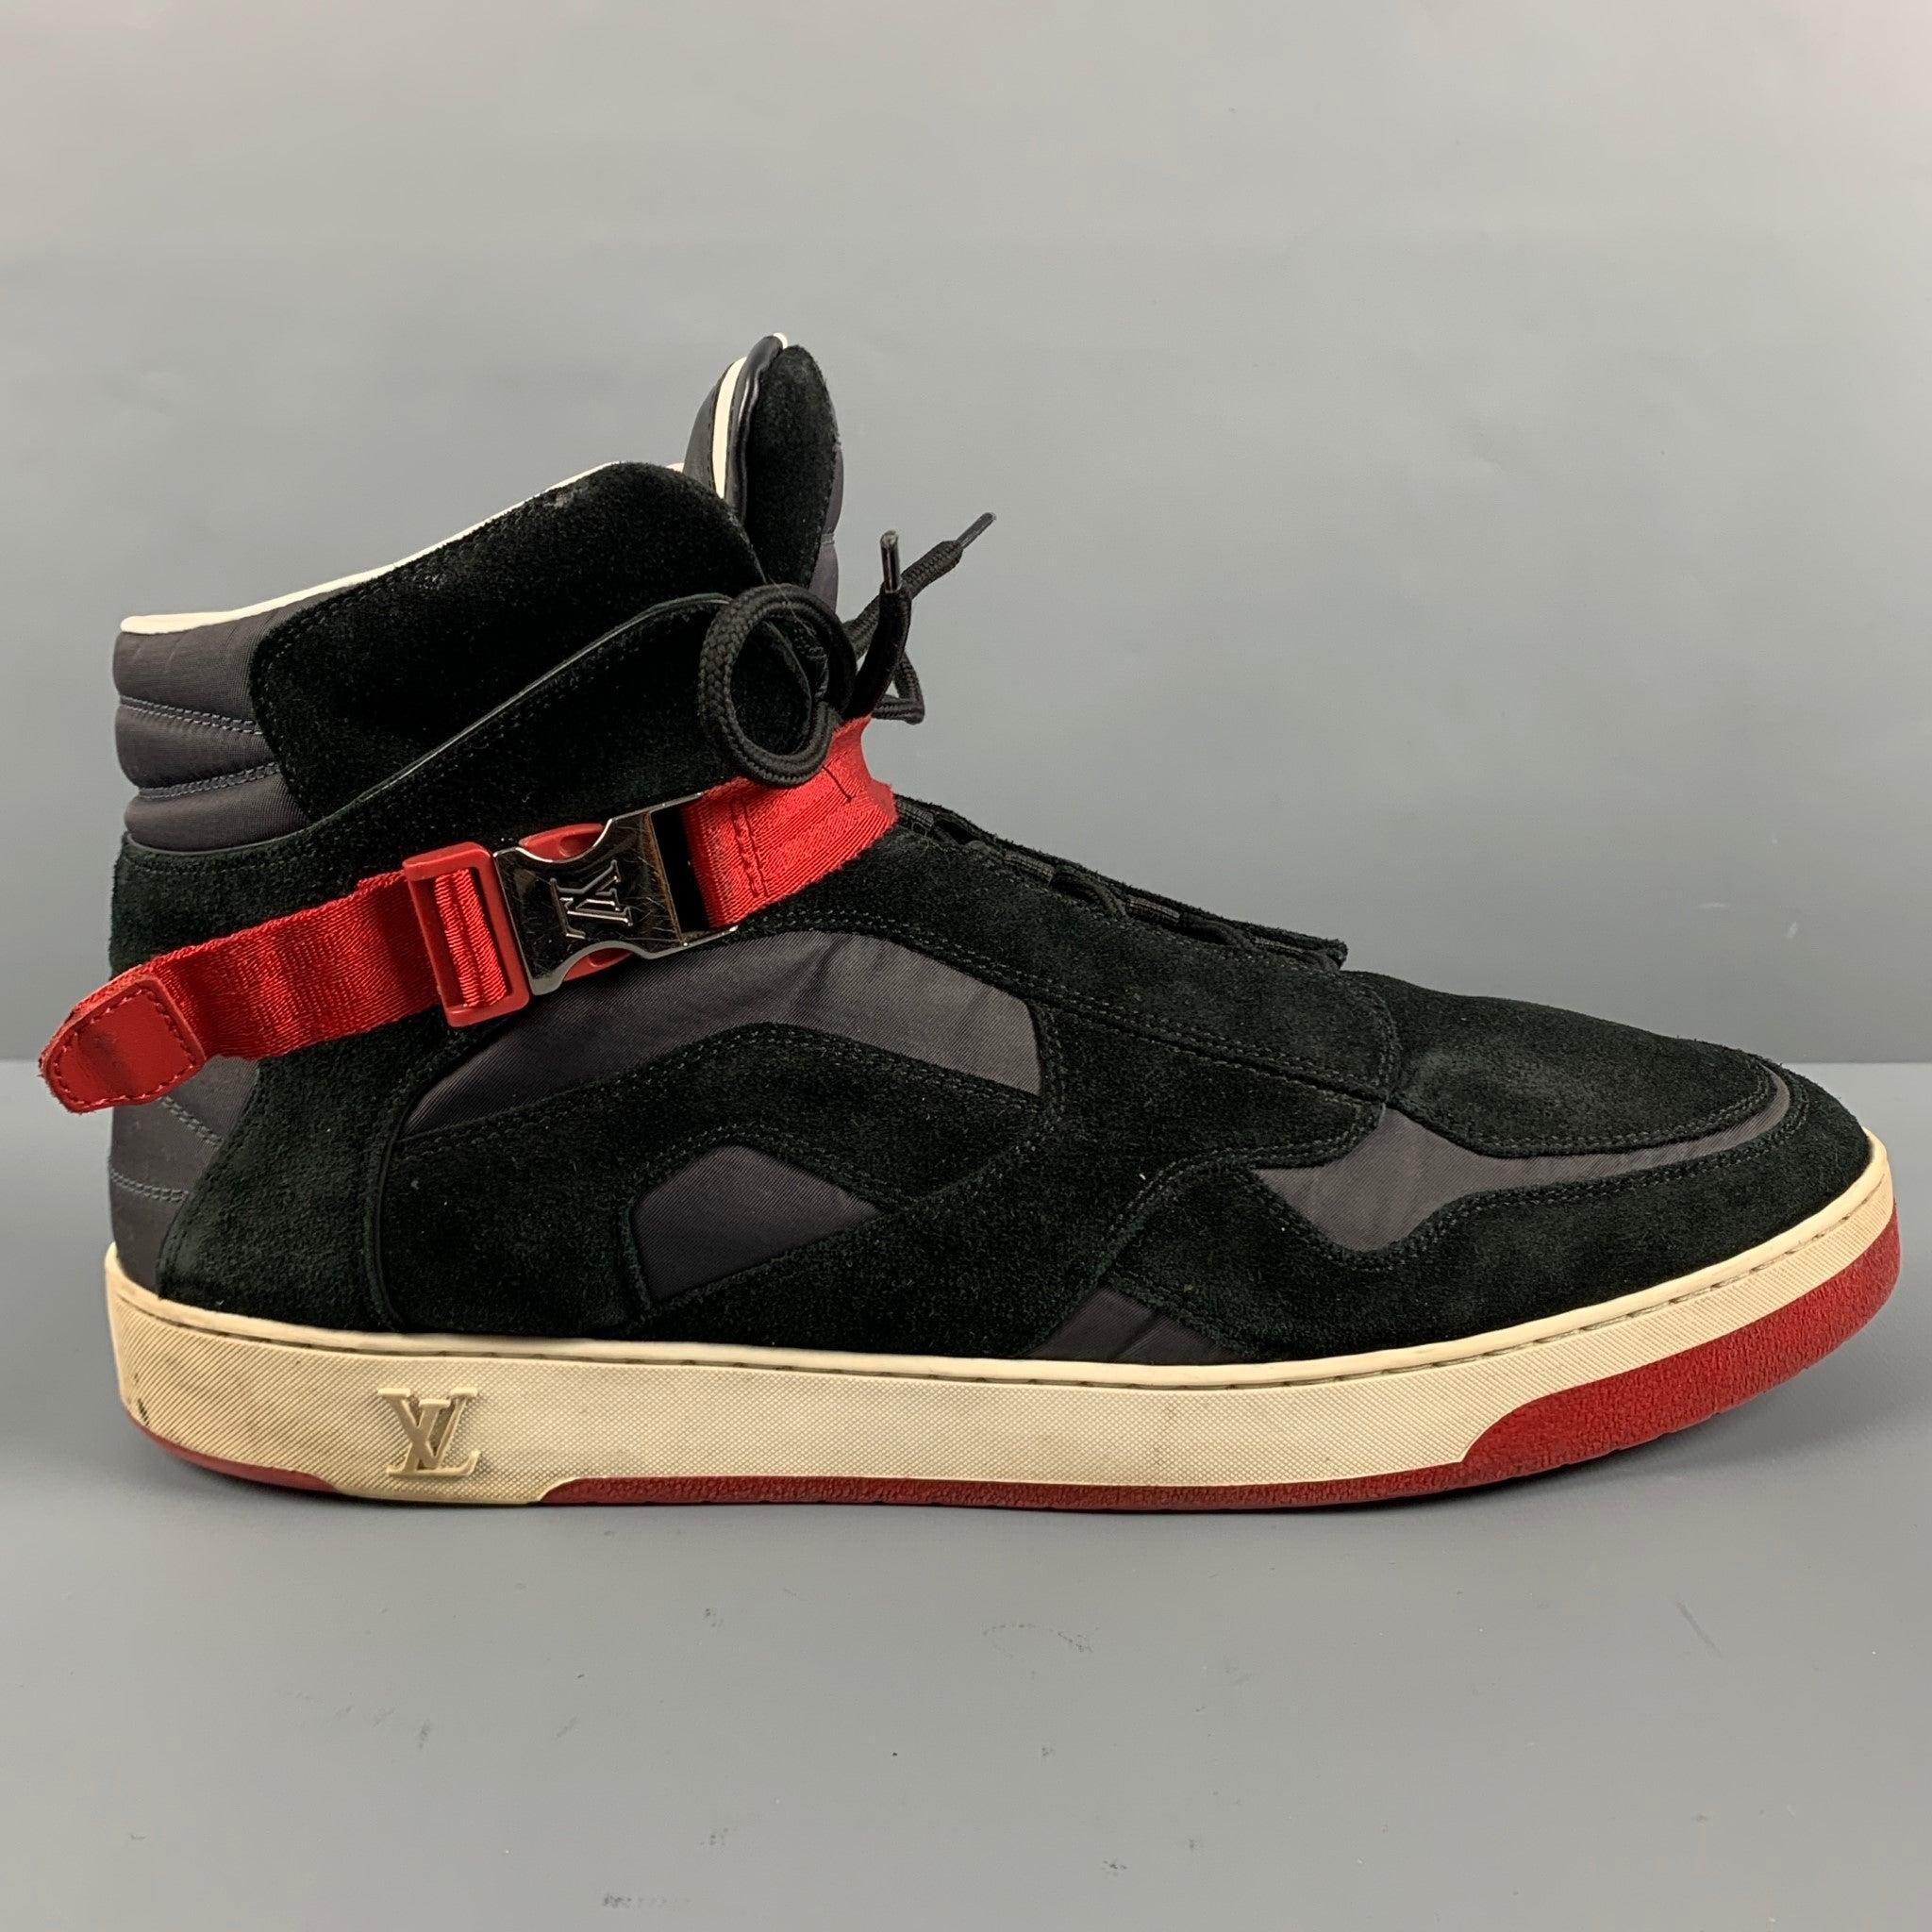 LOUIS VUITTON sneakers
in a black nylon and suede featuring red trim details, high top style, and rubber sole. Made in Italy.Very Good Pre-Owned Condition. Moderate signs of wear, as is. 

Marked:   GO 0183 12Outsole: 12.5 inches  x 4.25 in
  
 